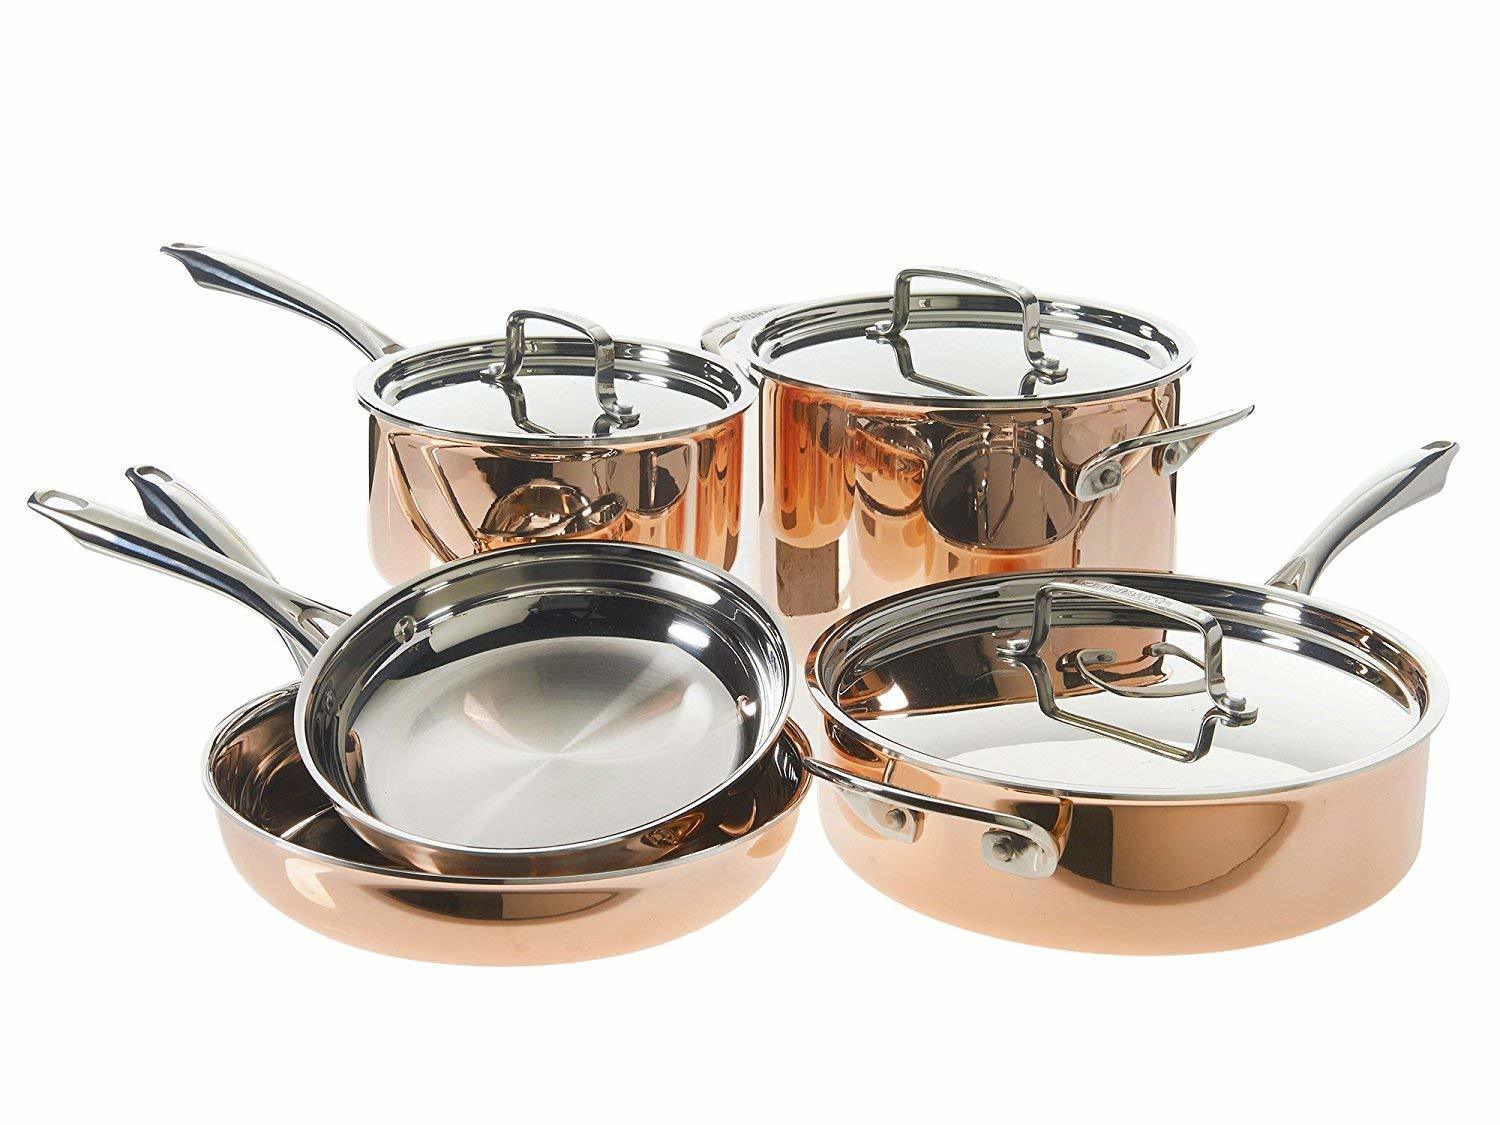 Today Only: Cuisinart 8-Piece Copper Tri-Ply Cookware Set For $199.99 Shipped From Amazon After $100 Price Drop!